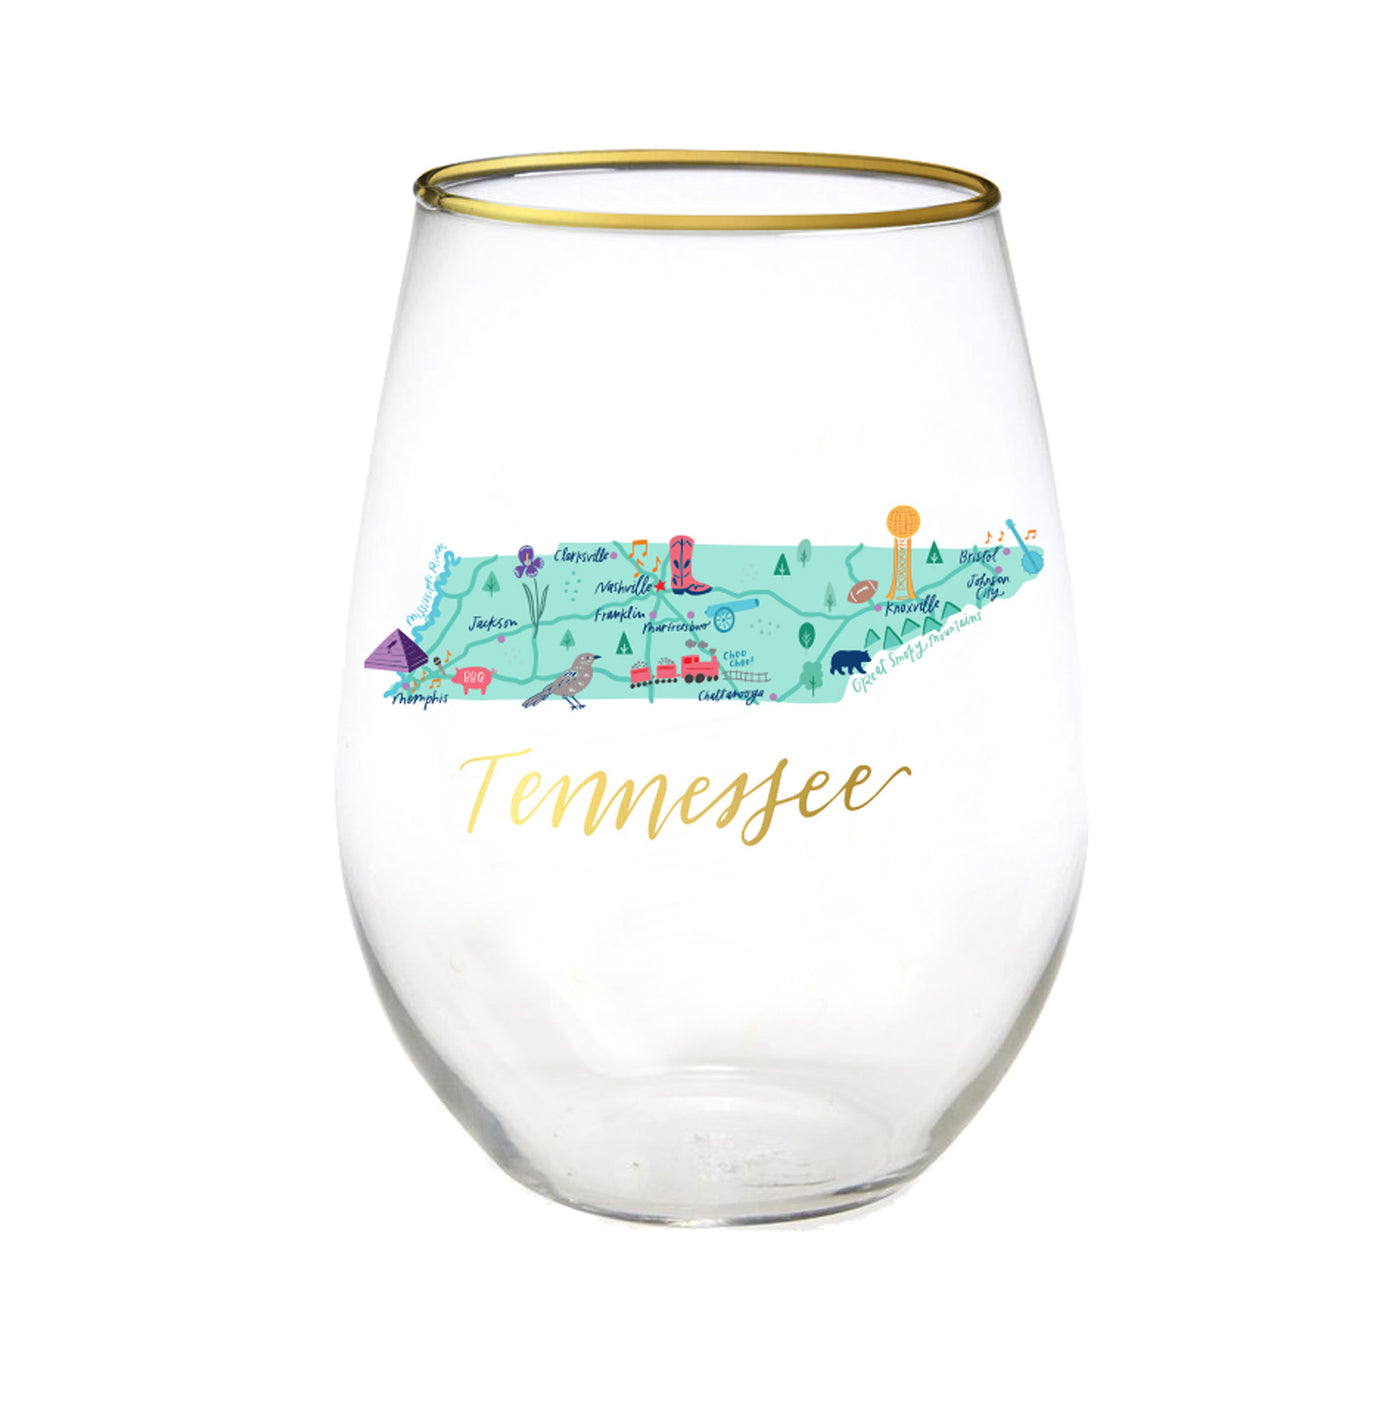 Tennessee | Stemless Wine Glass - Mary Square, LLC